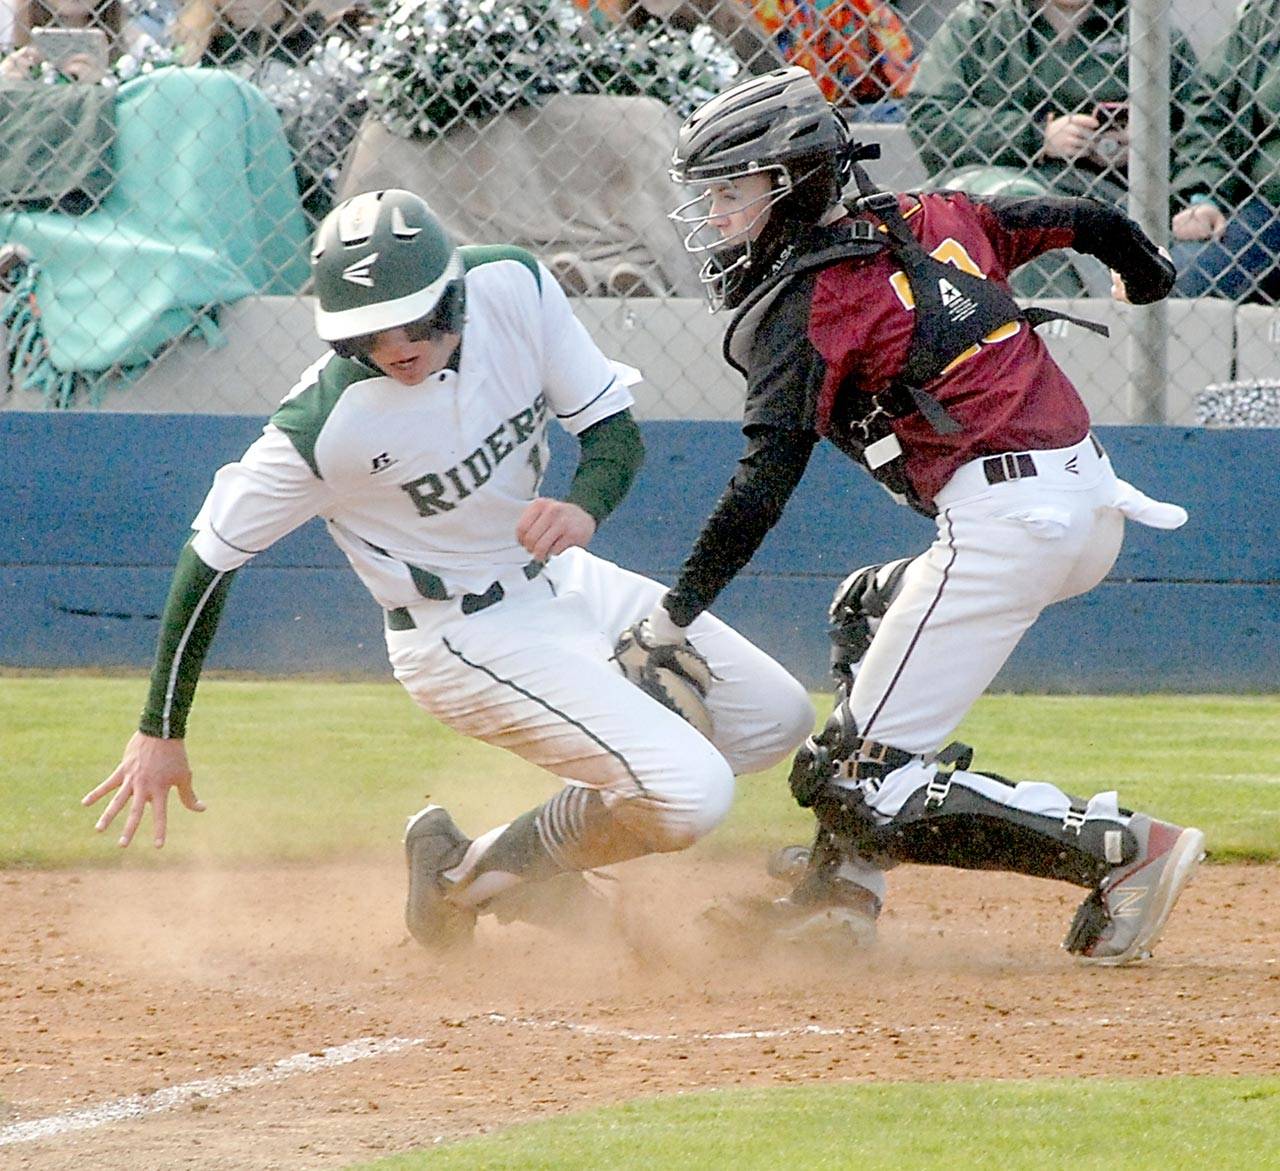 Port Angeles’ Ethan Flodstrom, left, attempts to steal home as Kingston catcher Tyler Bates cuts him off for an out during the third inning on Wednesday at Port Angeles Civic Field. (Keith Thorpe/Peninsula Daily News)